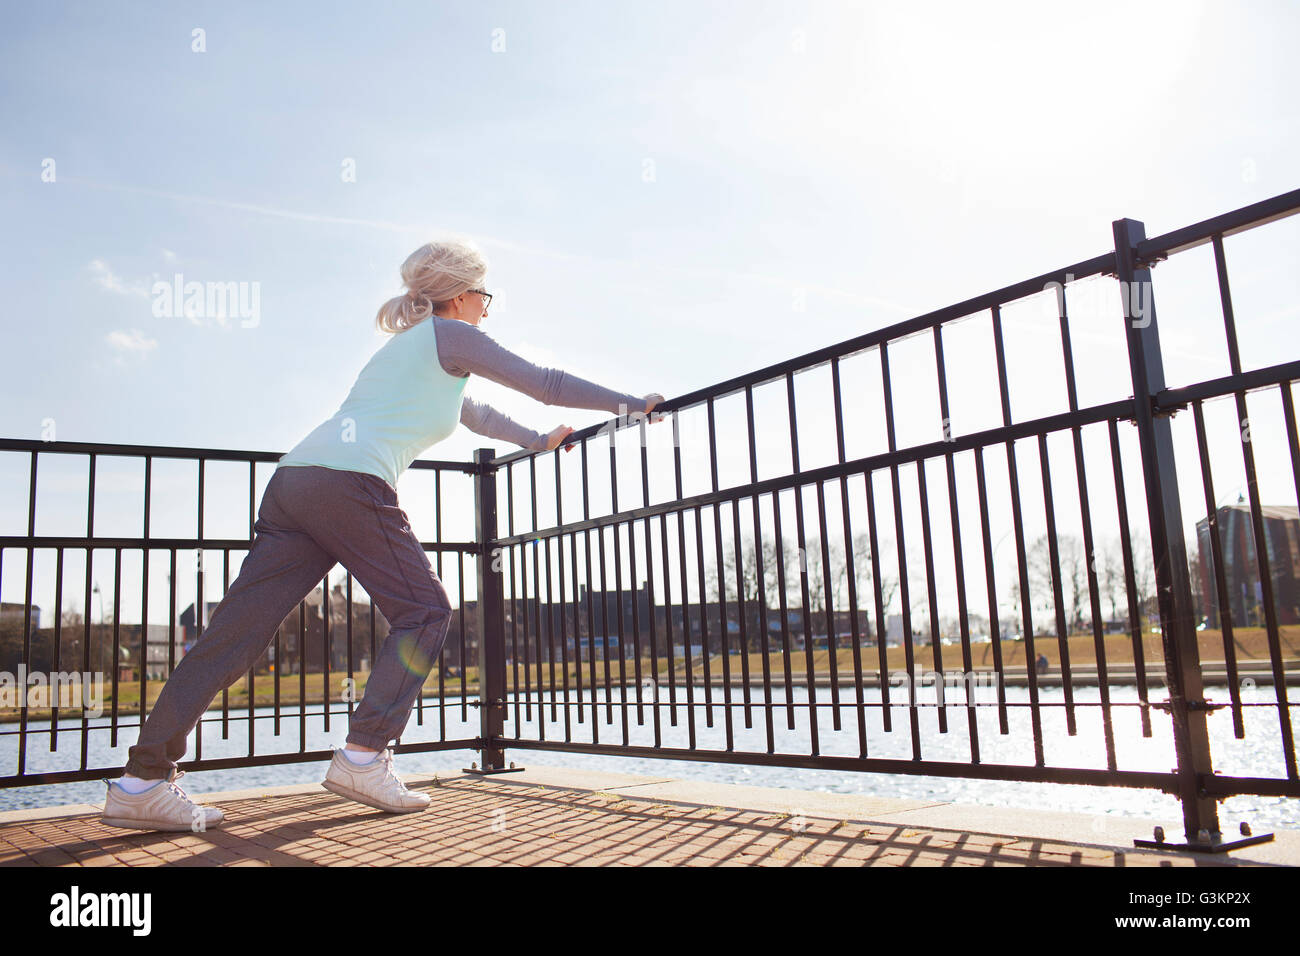 Full length side view of woman leaning against railing stretching Stock Photo